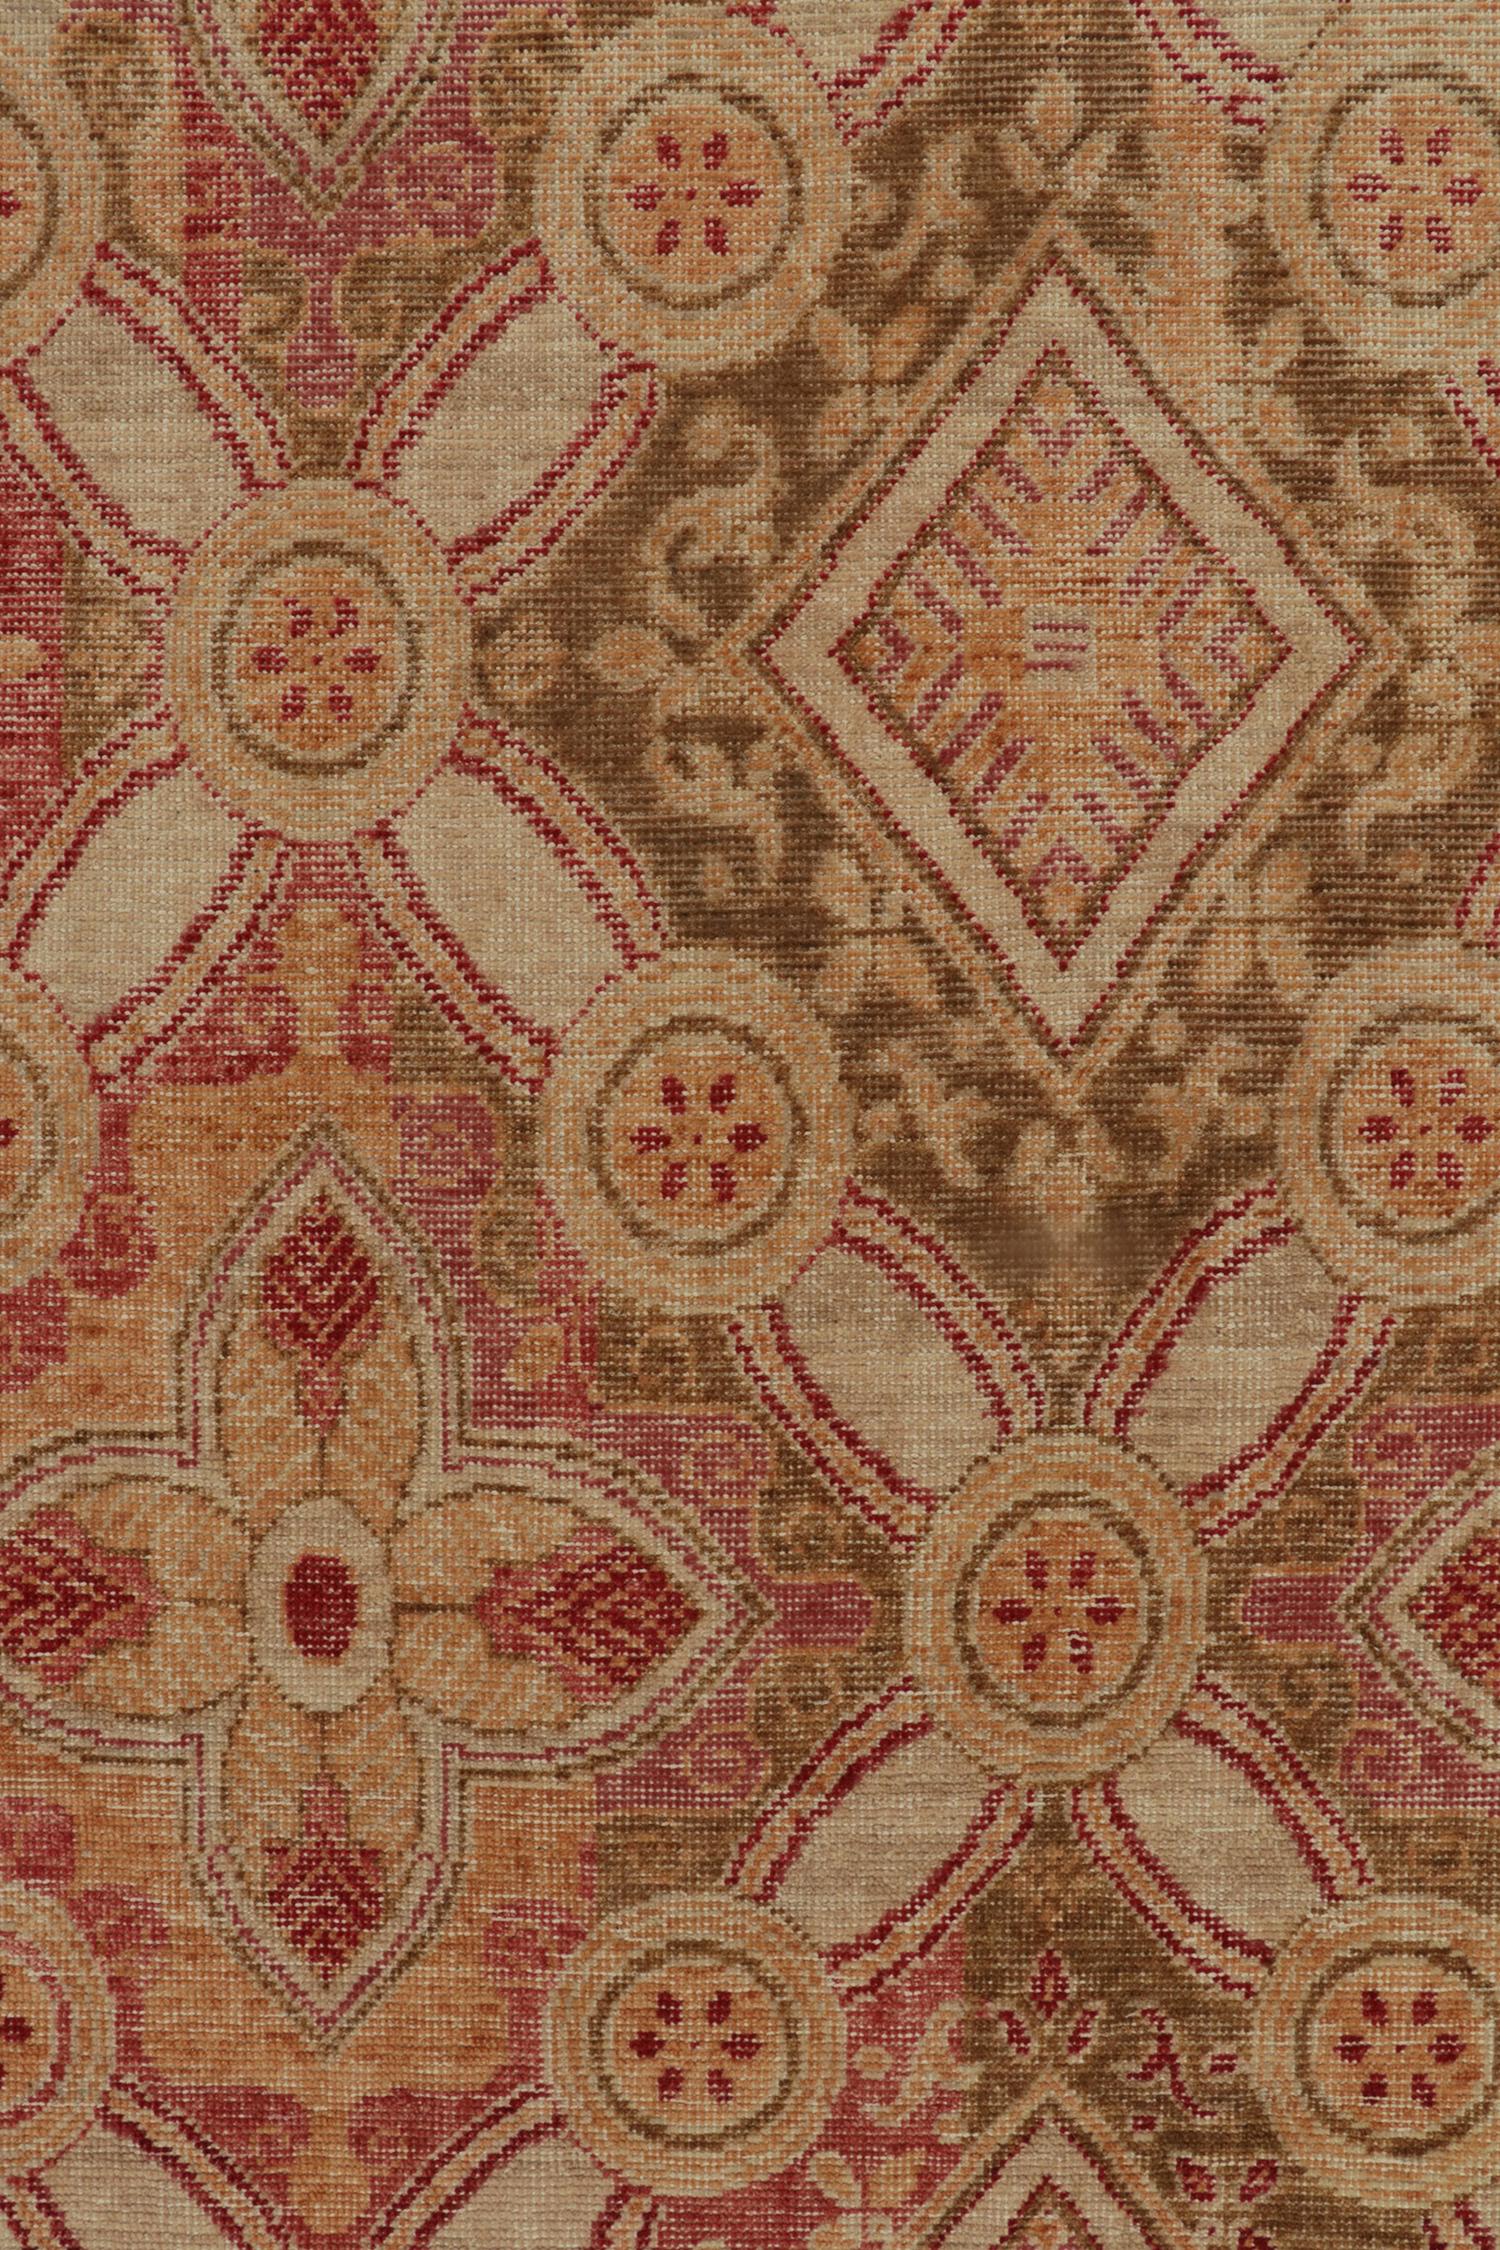 Hand-Knotted Rug & Kilim’s Distressed Style Rug in Red, Gold and Beige-Brown Trellises For Sale